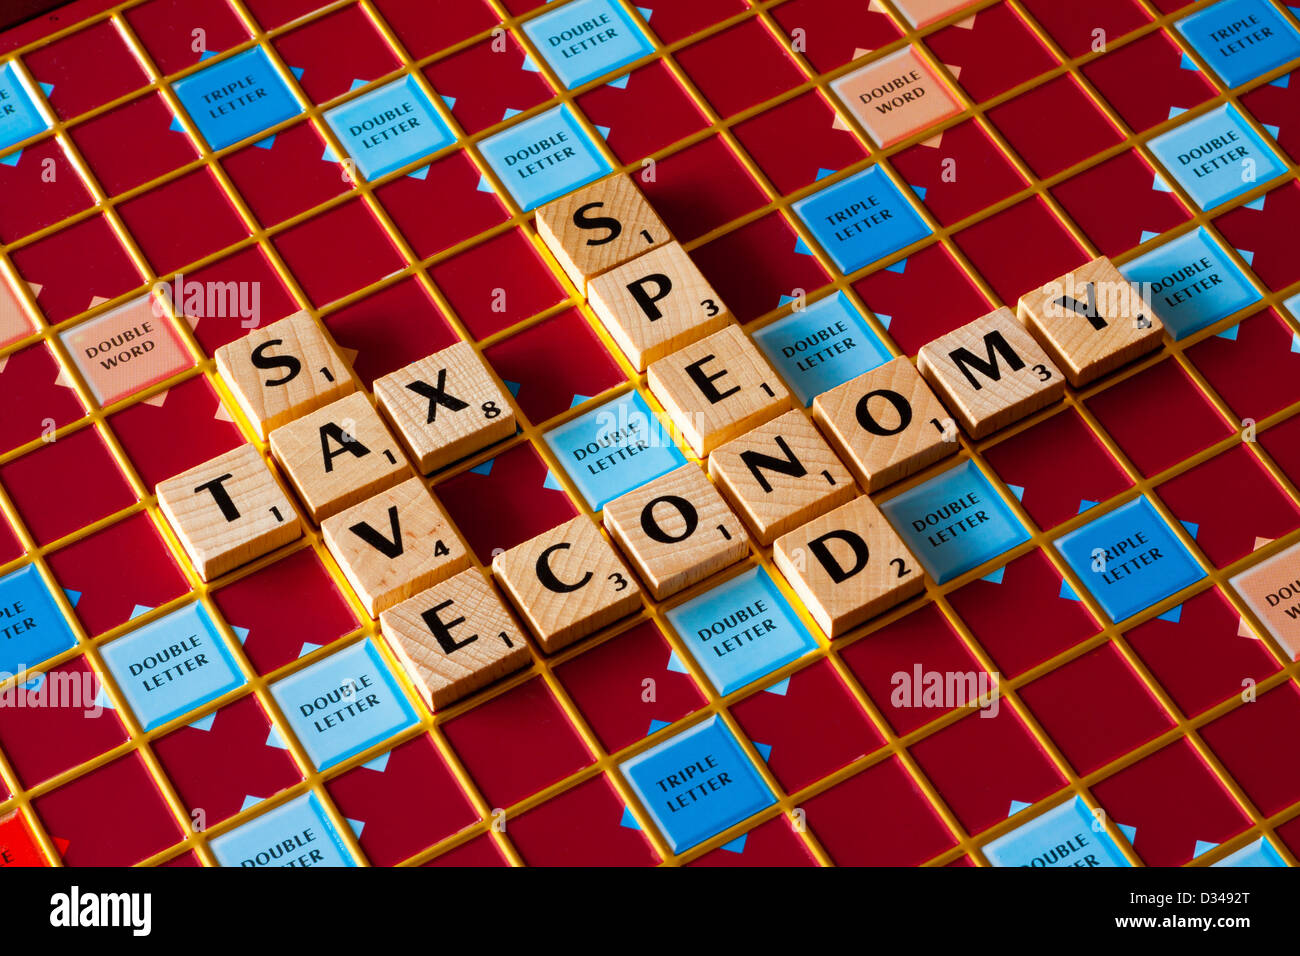 Scrabble board spelling Save Tax Spend Economy words relevant to the budget and state of the economy and finance Stock Photo